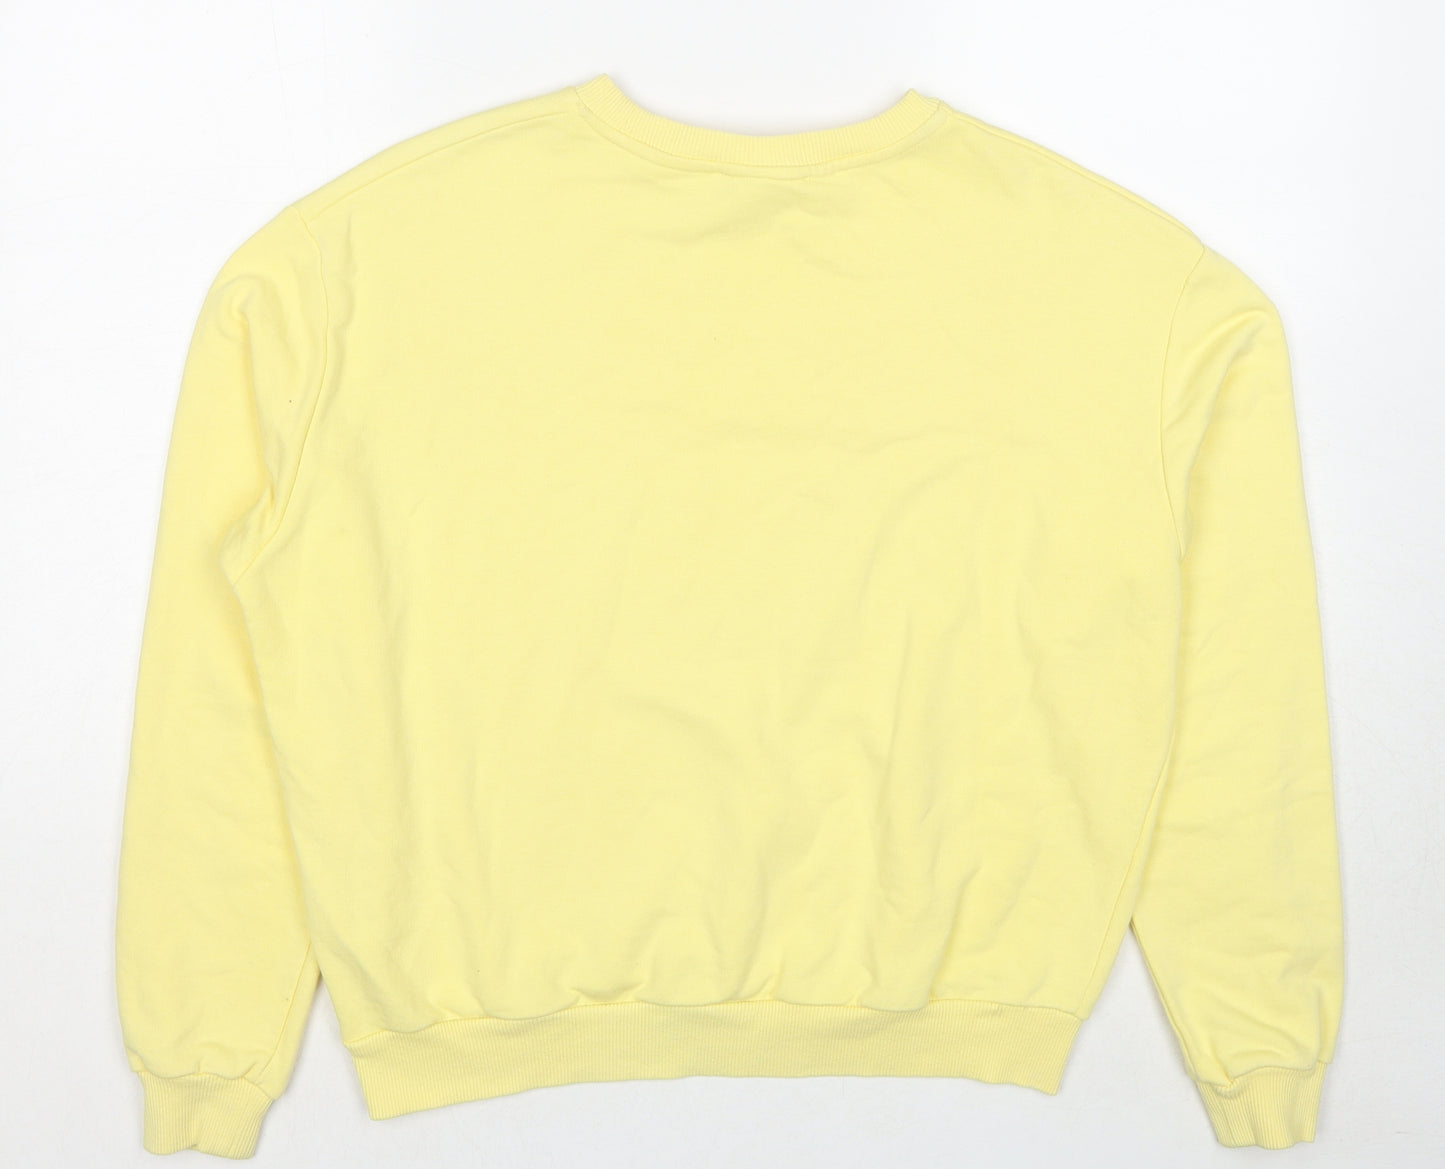 Mynelly Womens Yellow Cotton Pullover Sweatshirt Size S Pullover - This is My Day Off Sweatshirt Size S-M